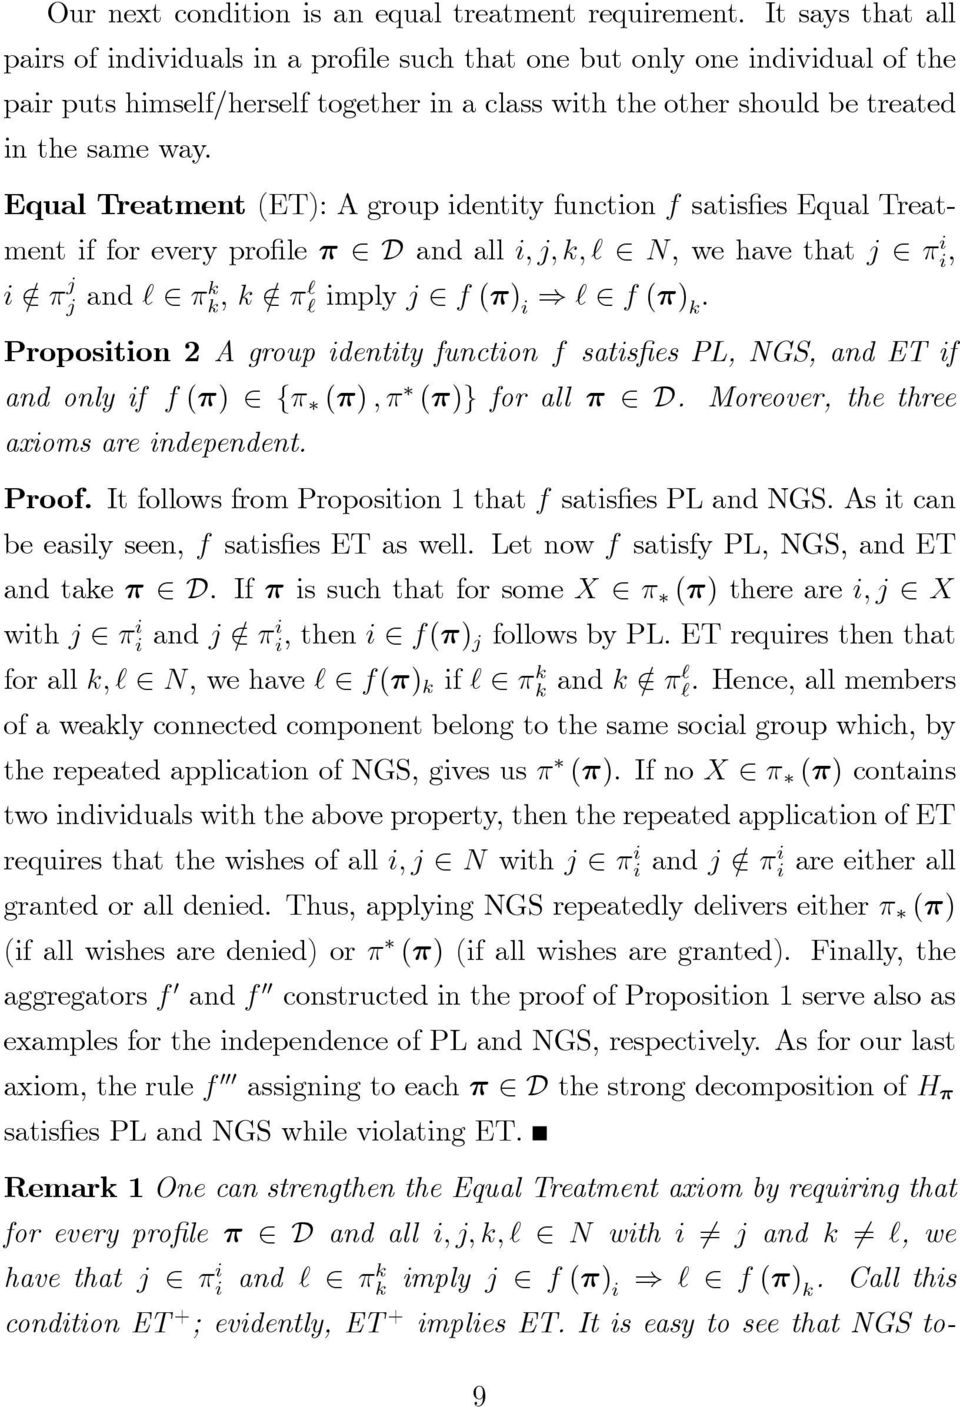 Equal Treatment (ET): A group identity function f satis es Equal Treatment if for every pro le 2 D and all i; j; k; ` 2 N, we have that j 2 i i, i =2 j j and ` 2 k k, k =2 `` imply j 2 f () i ) ` 2 f